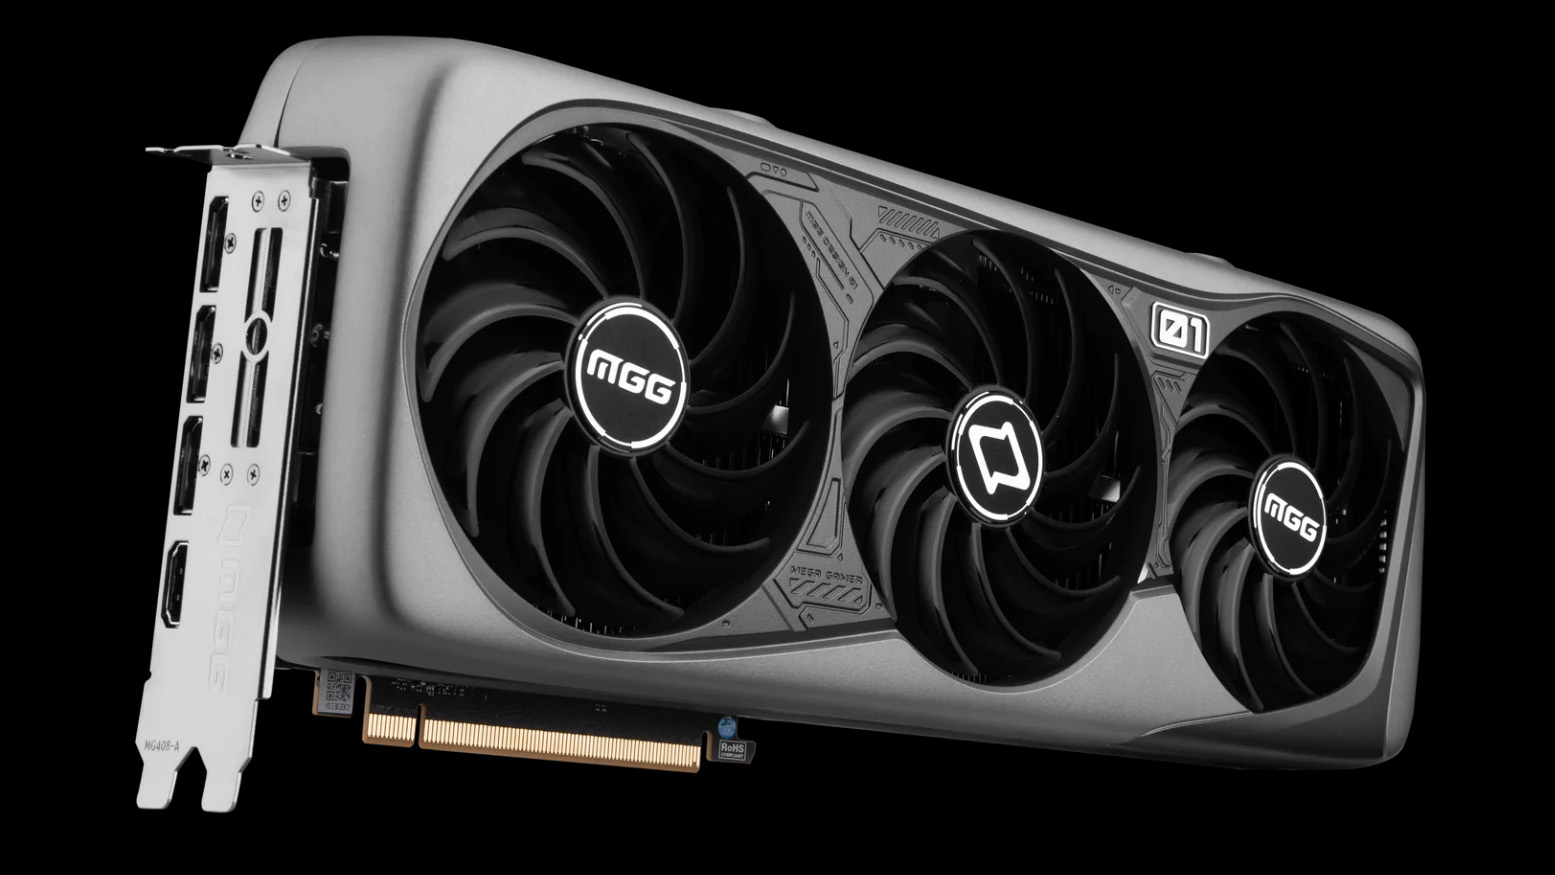 Nvidia launches China-specific RTX 4090D Dragon GPU, sanctions-compliant  model has fewer cores and lower power draw